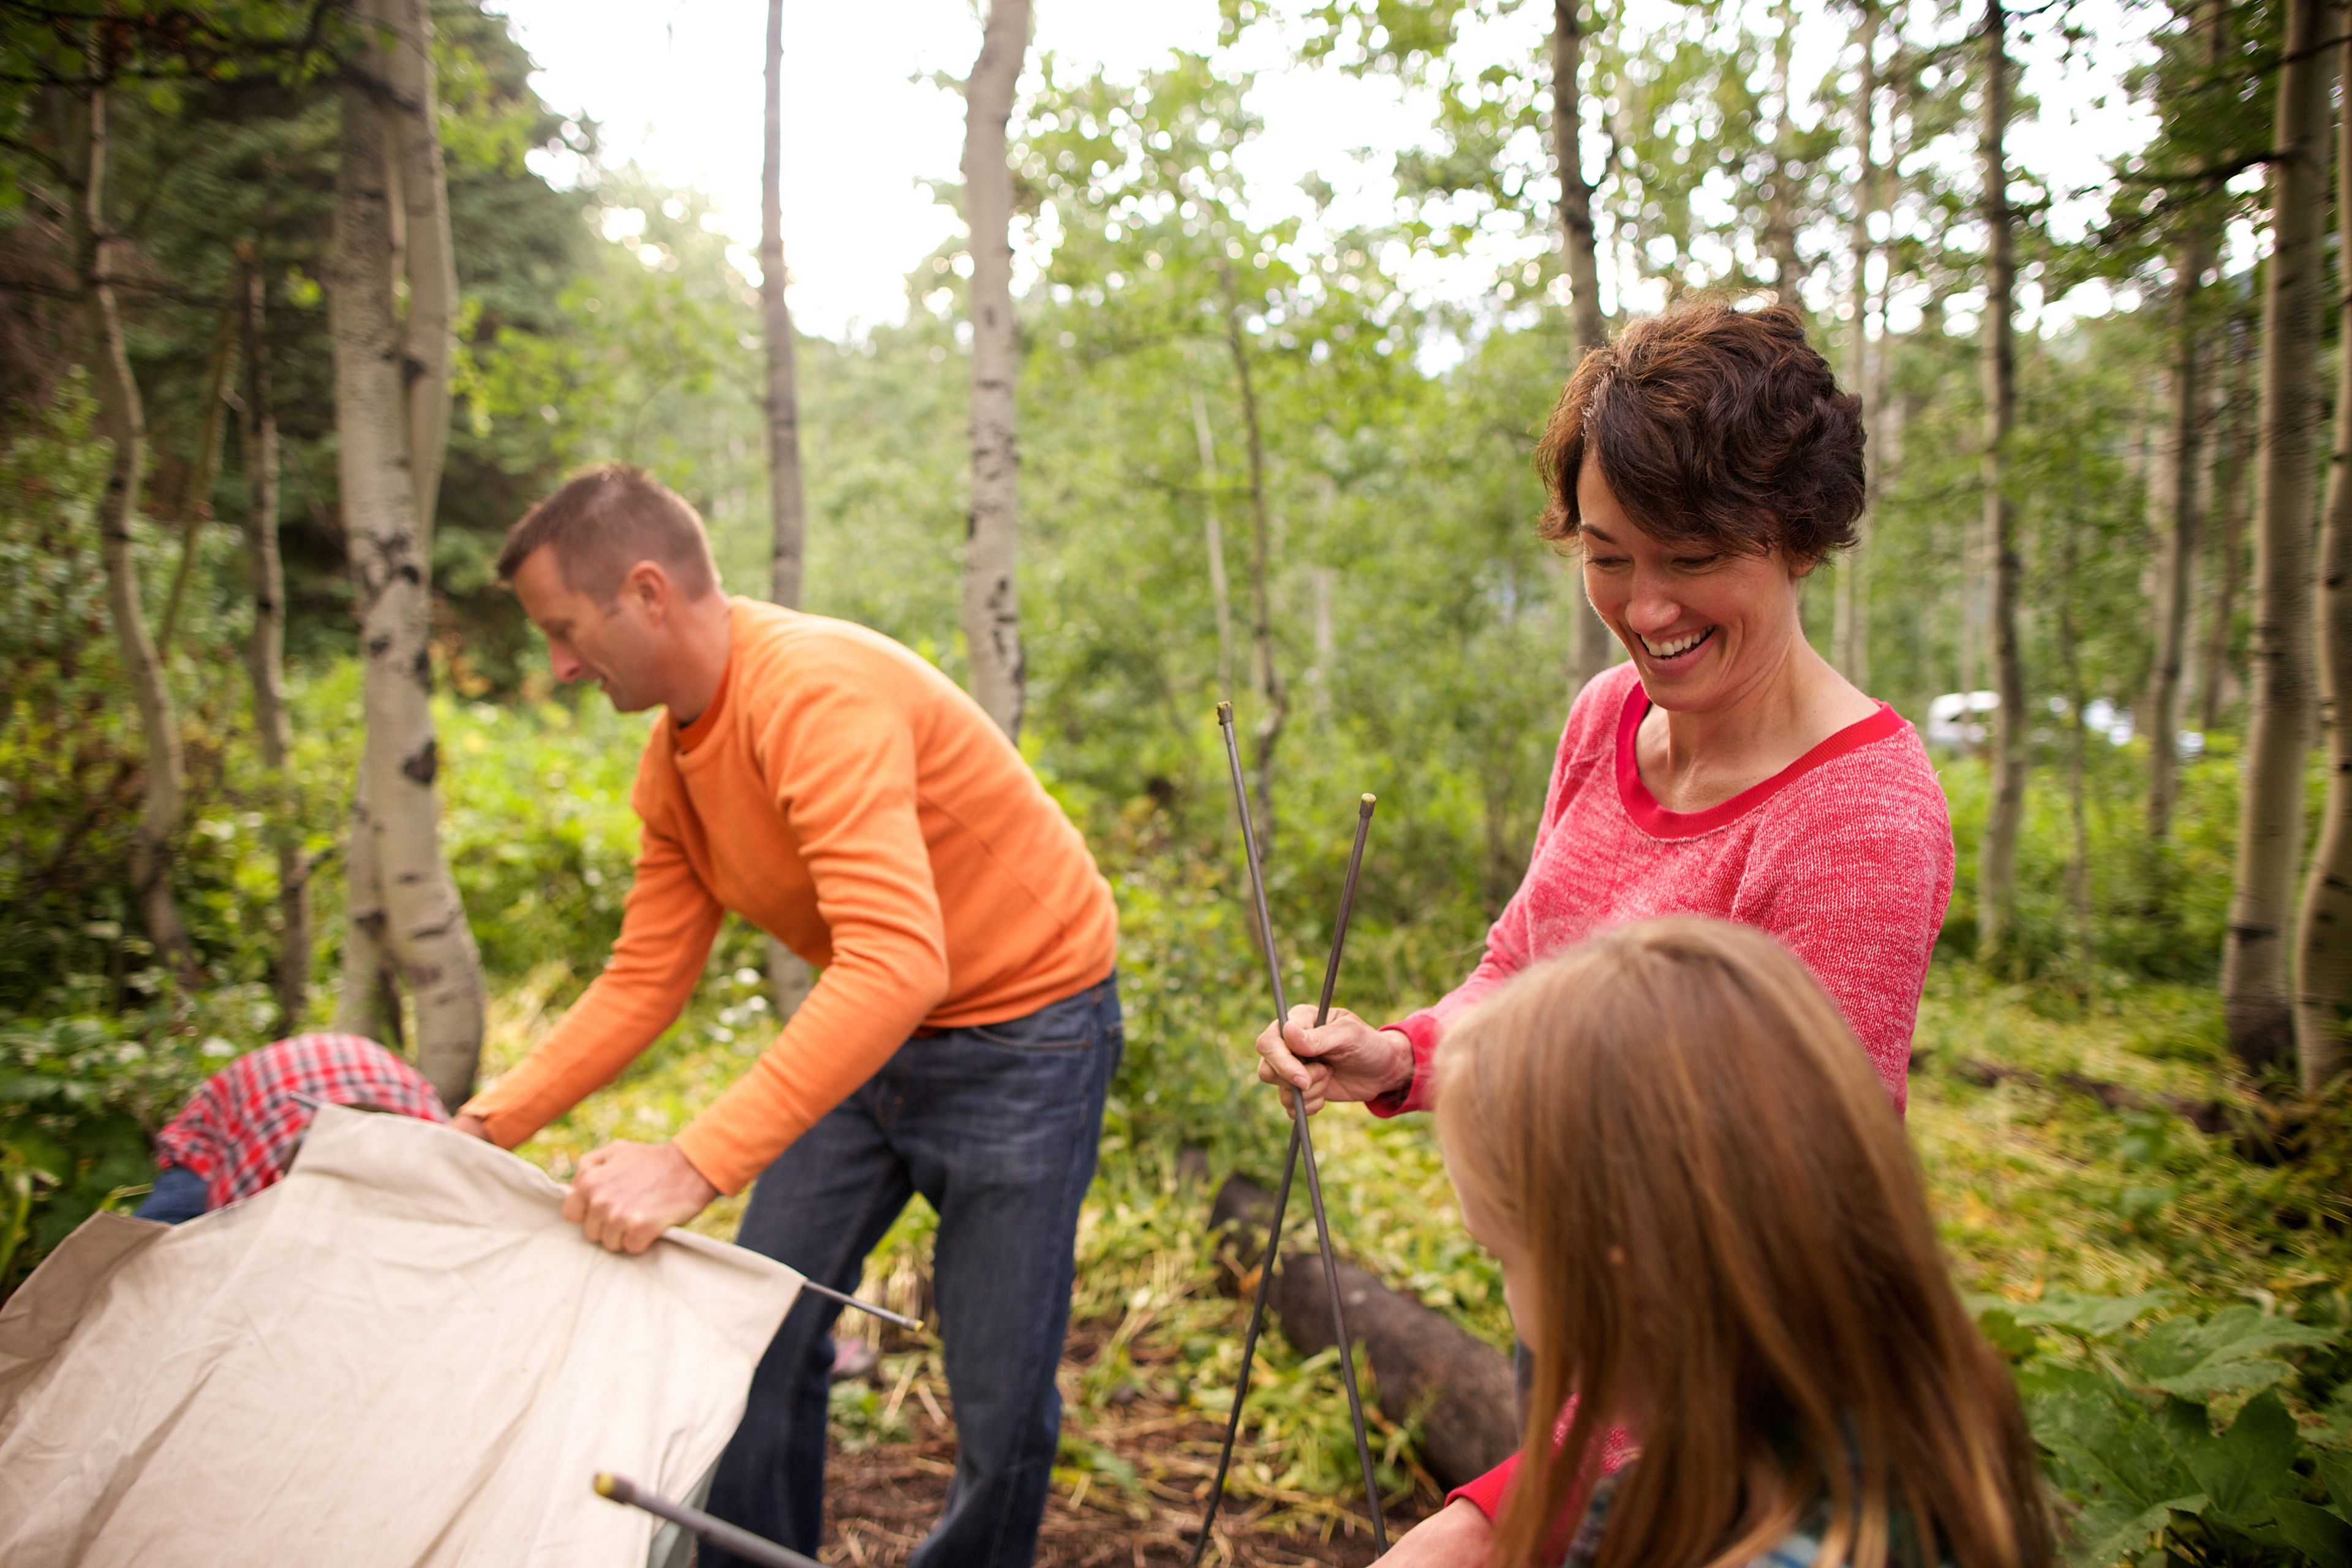 A family setting up a tent as they camp together.